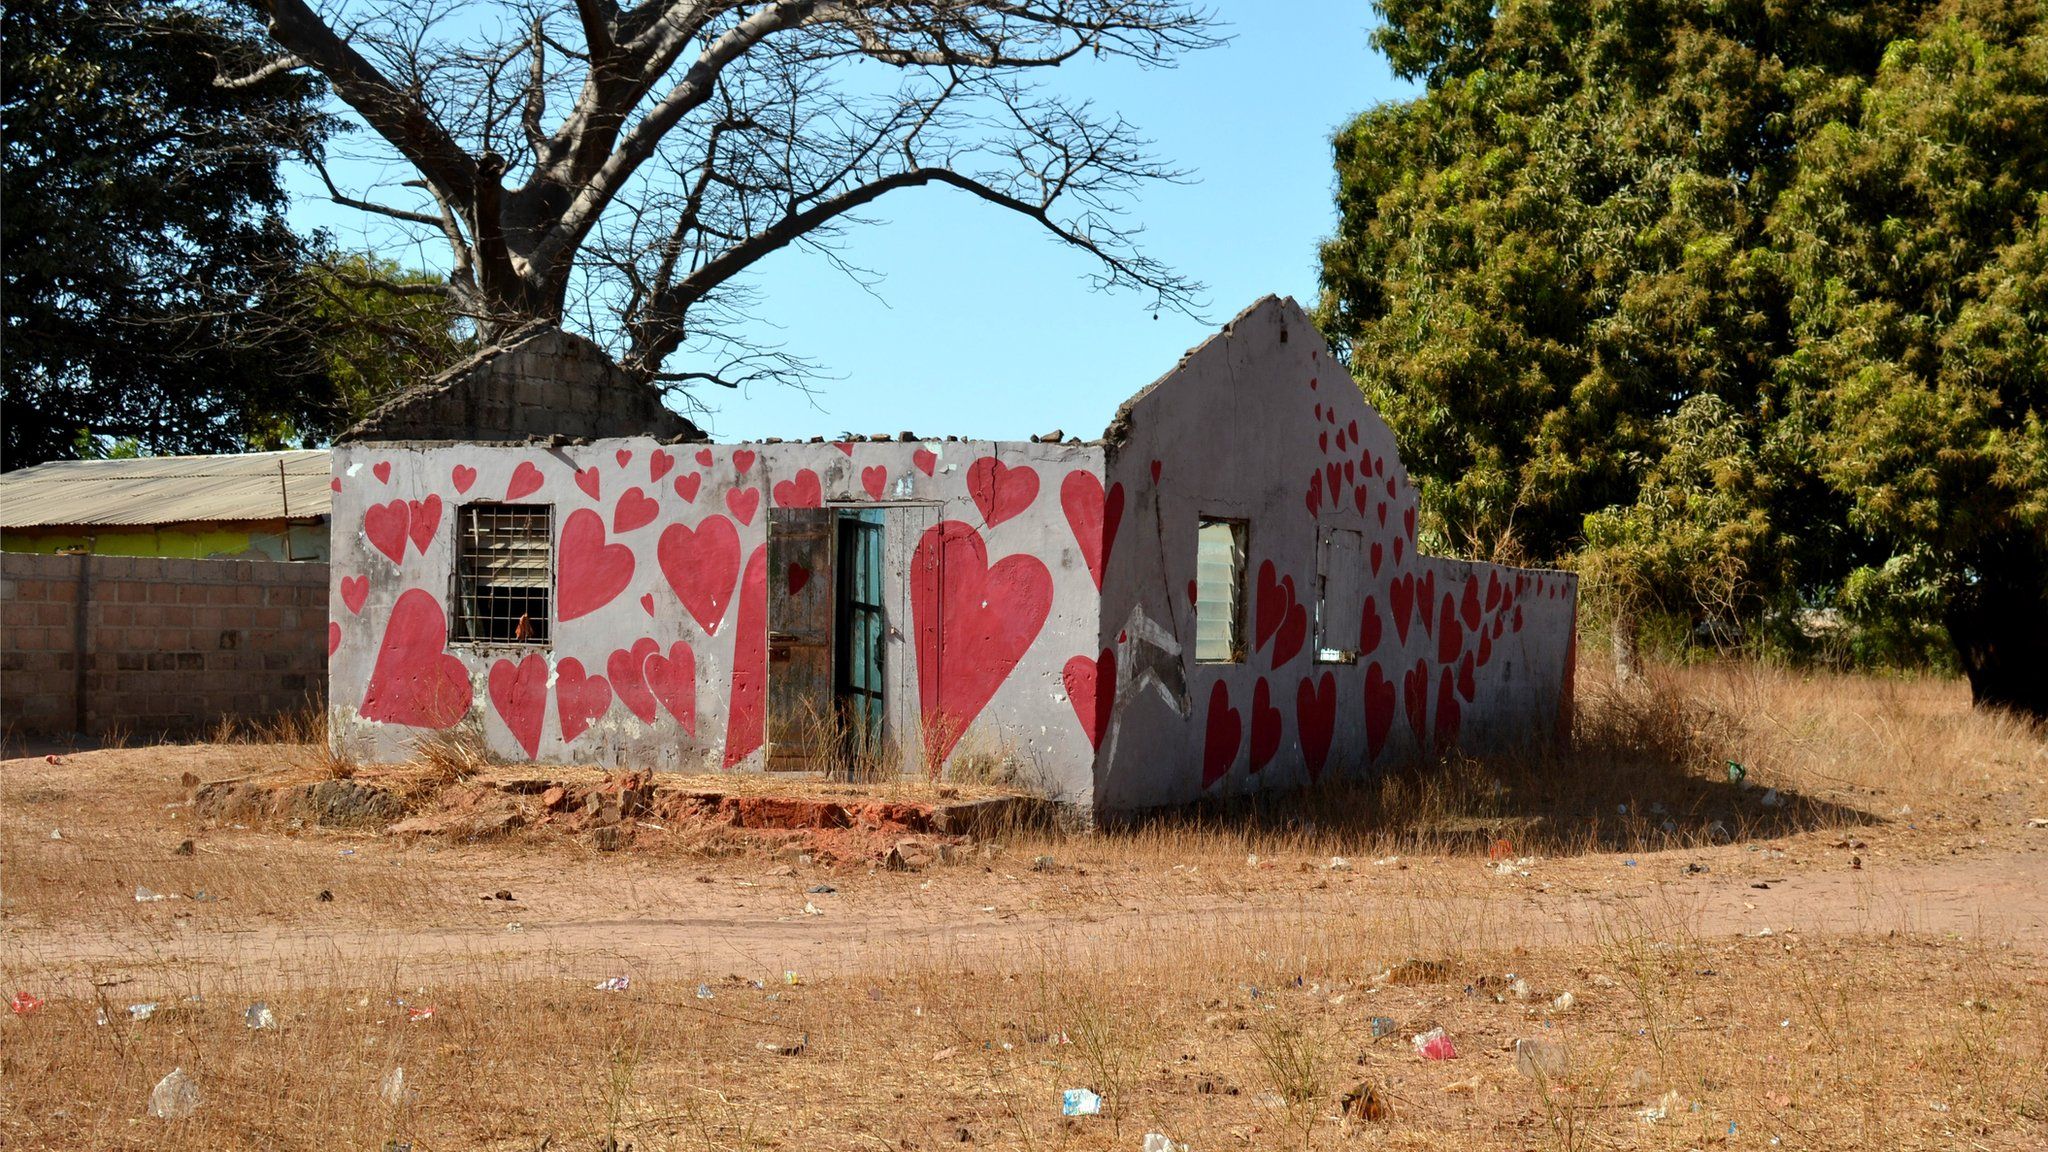 House painted with hearts - painted by community